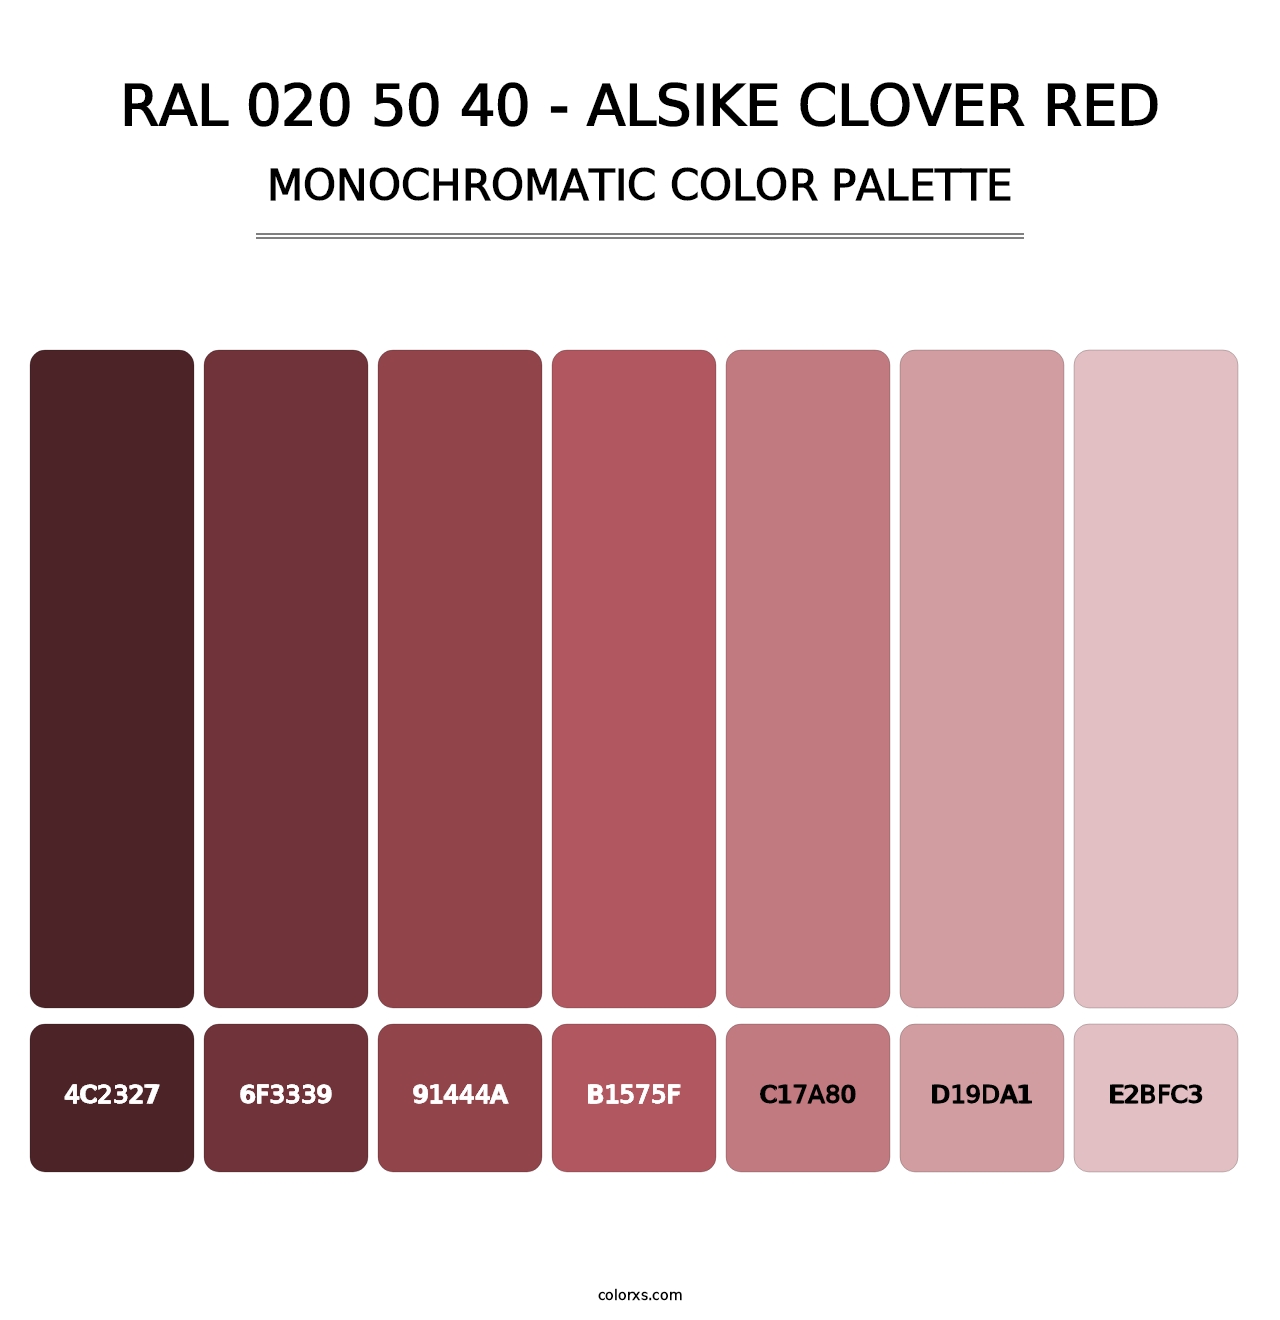 RAL 020 50 40 - Alsike Clover Red - Monochromatic Color Palette